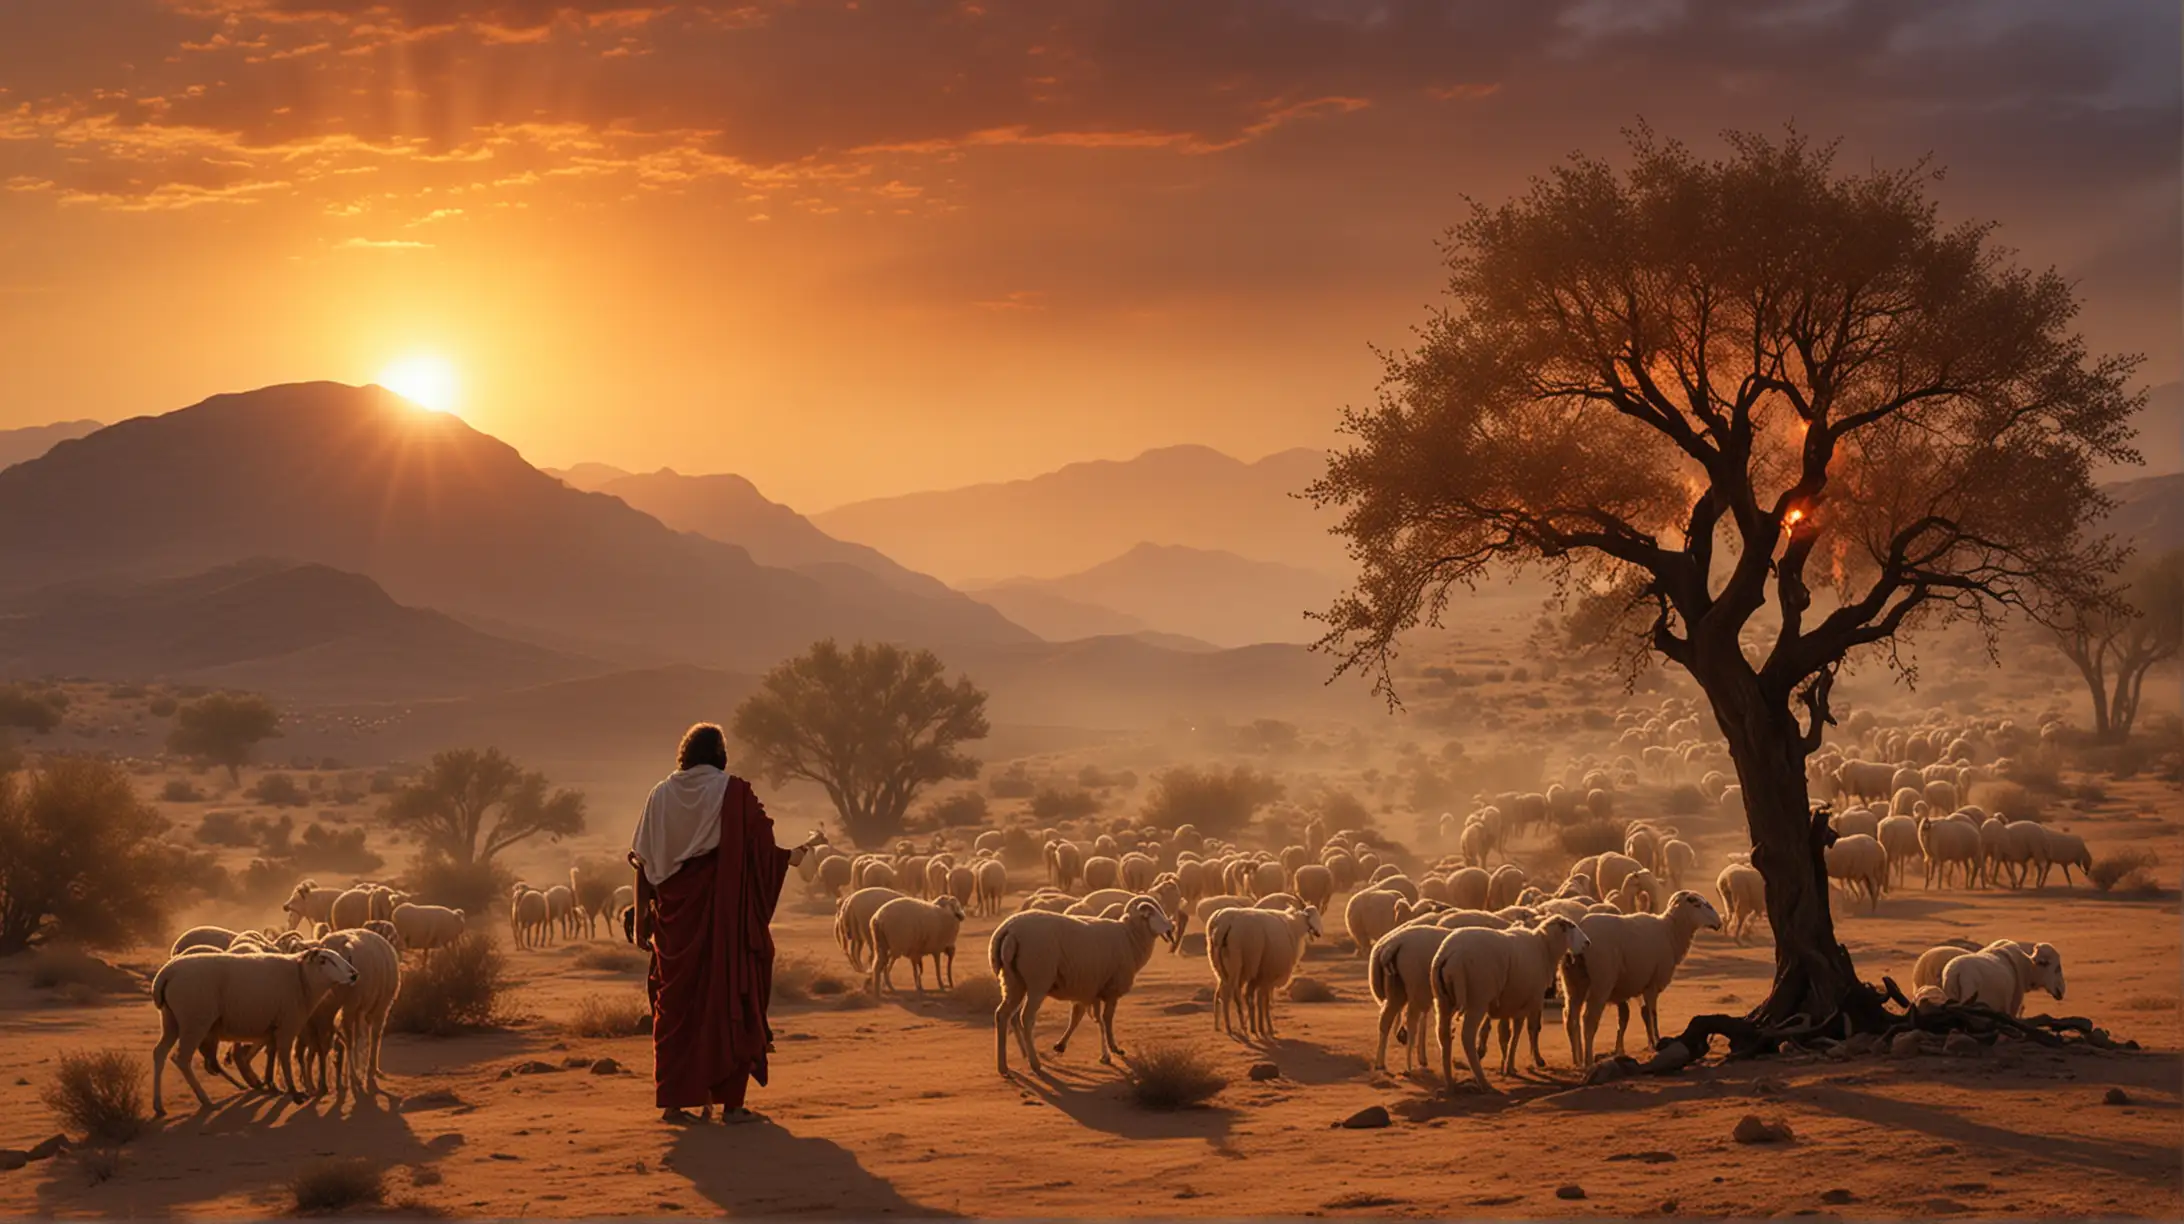 Moses Confronting the Burning Bush at Twilight in the Desert